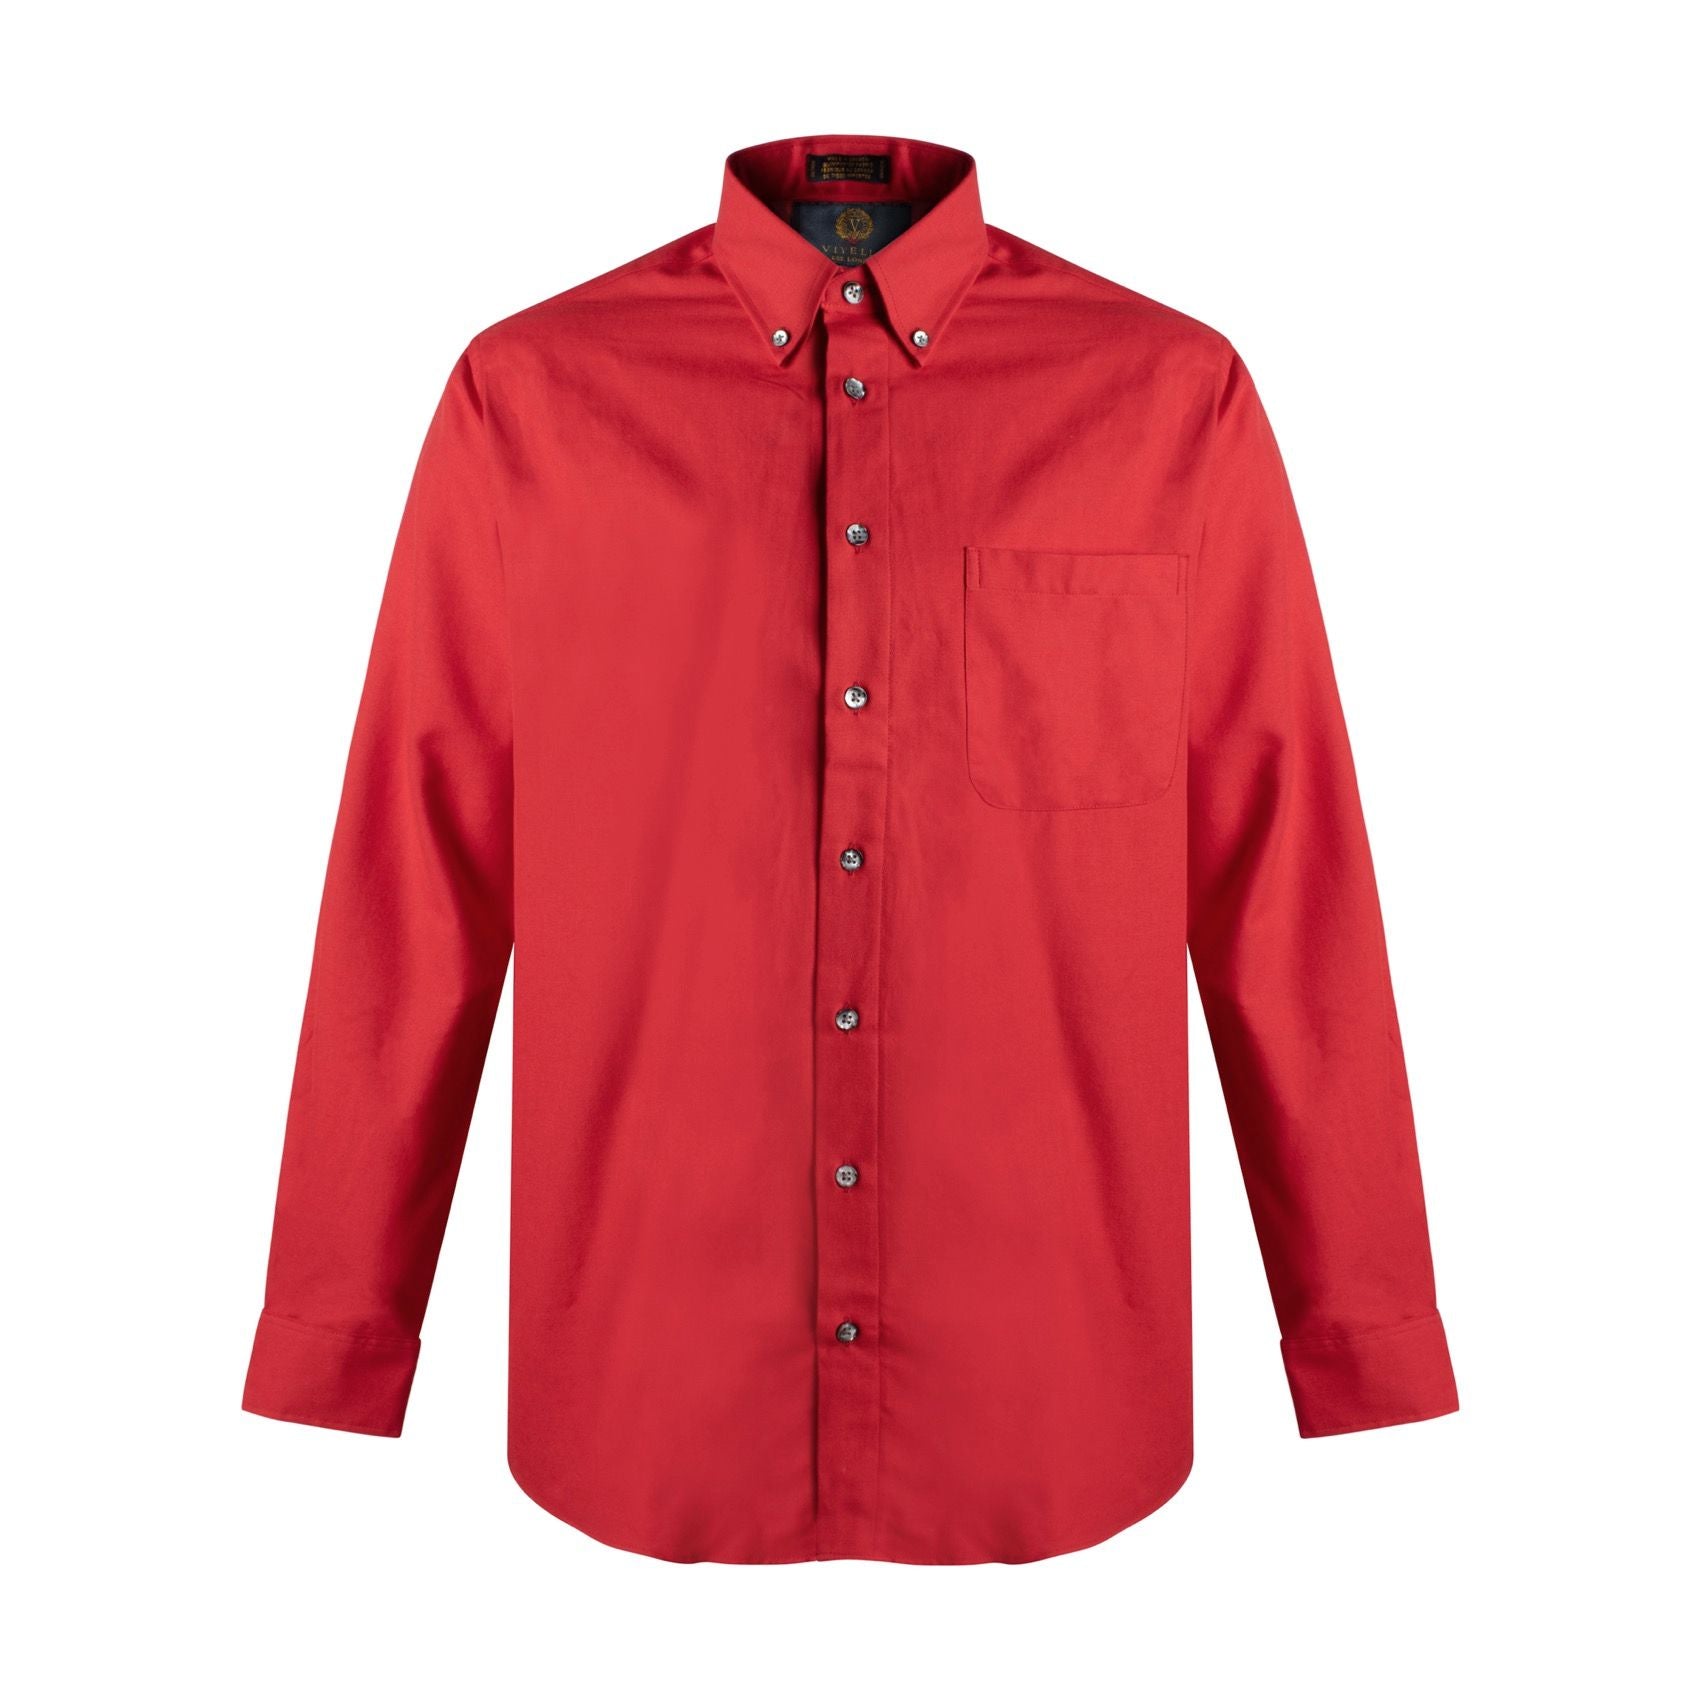 Cotton and Wool Blend Button-Down Shirt in Red by Viyella